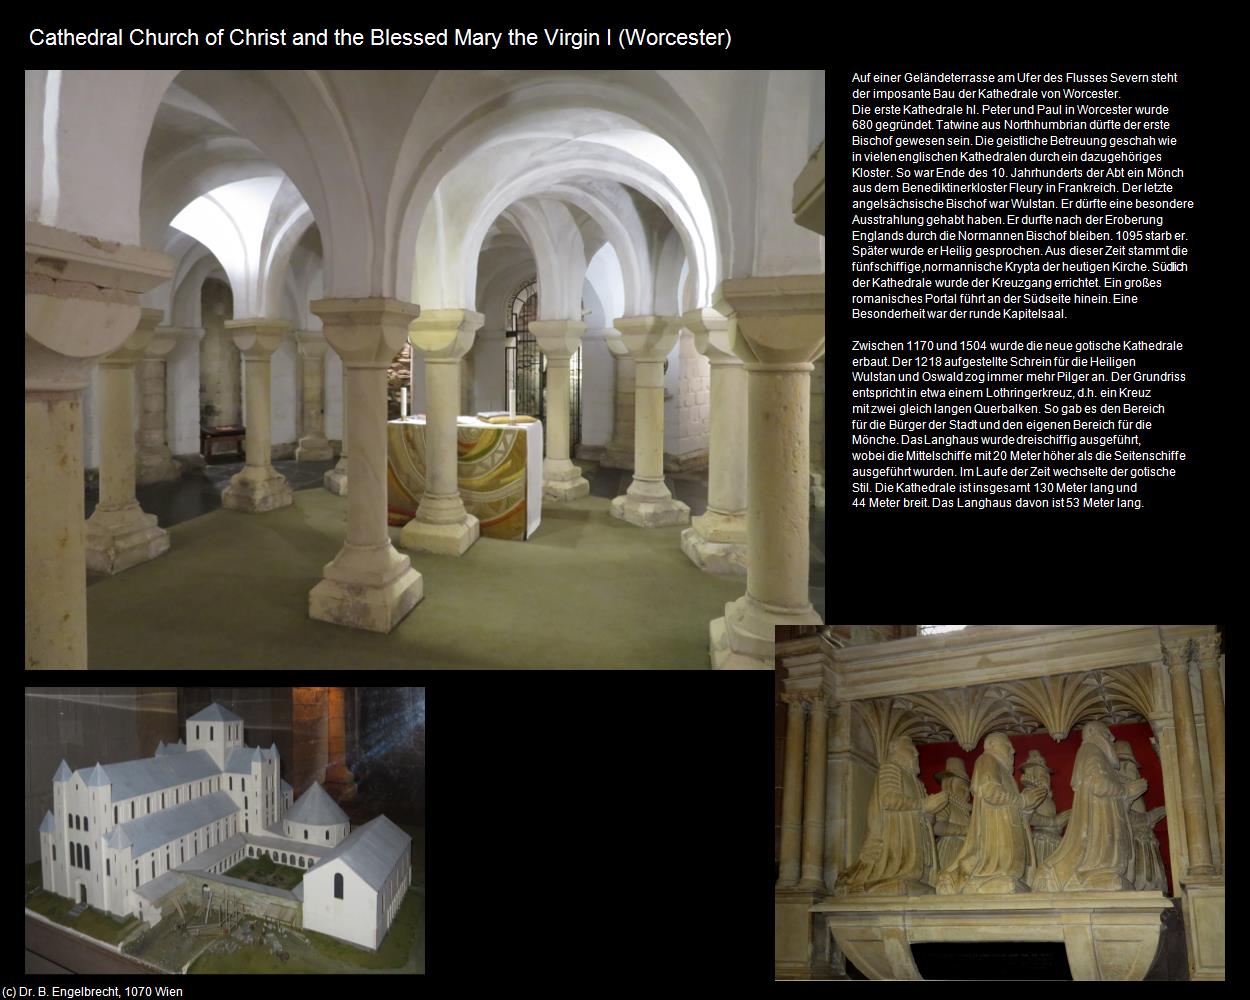 Cathedral Church of Christ and the Blessed Mary the Virgin I     (Worcester, England) in Kulturatlas-ENGLAND und WALES